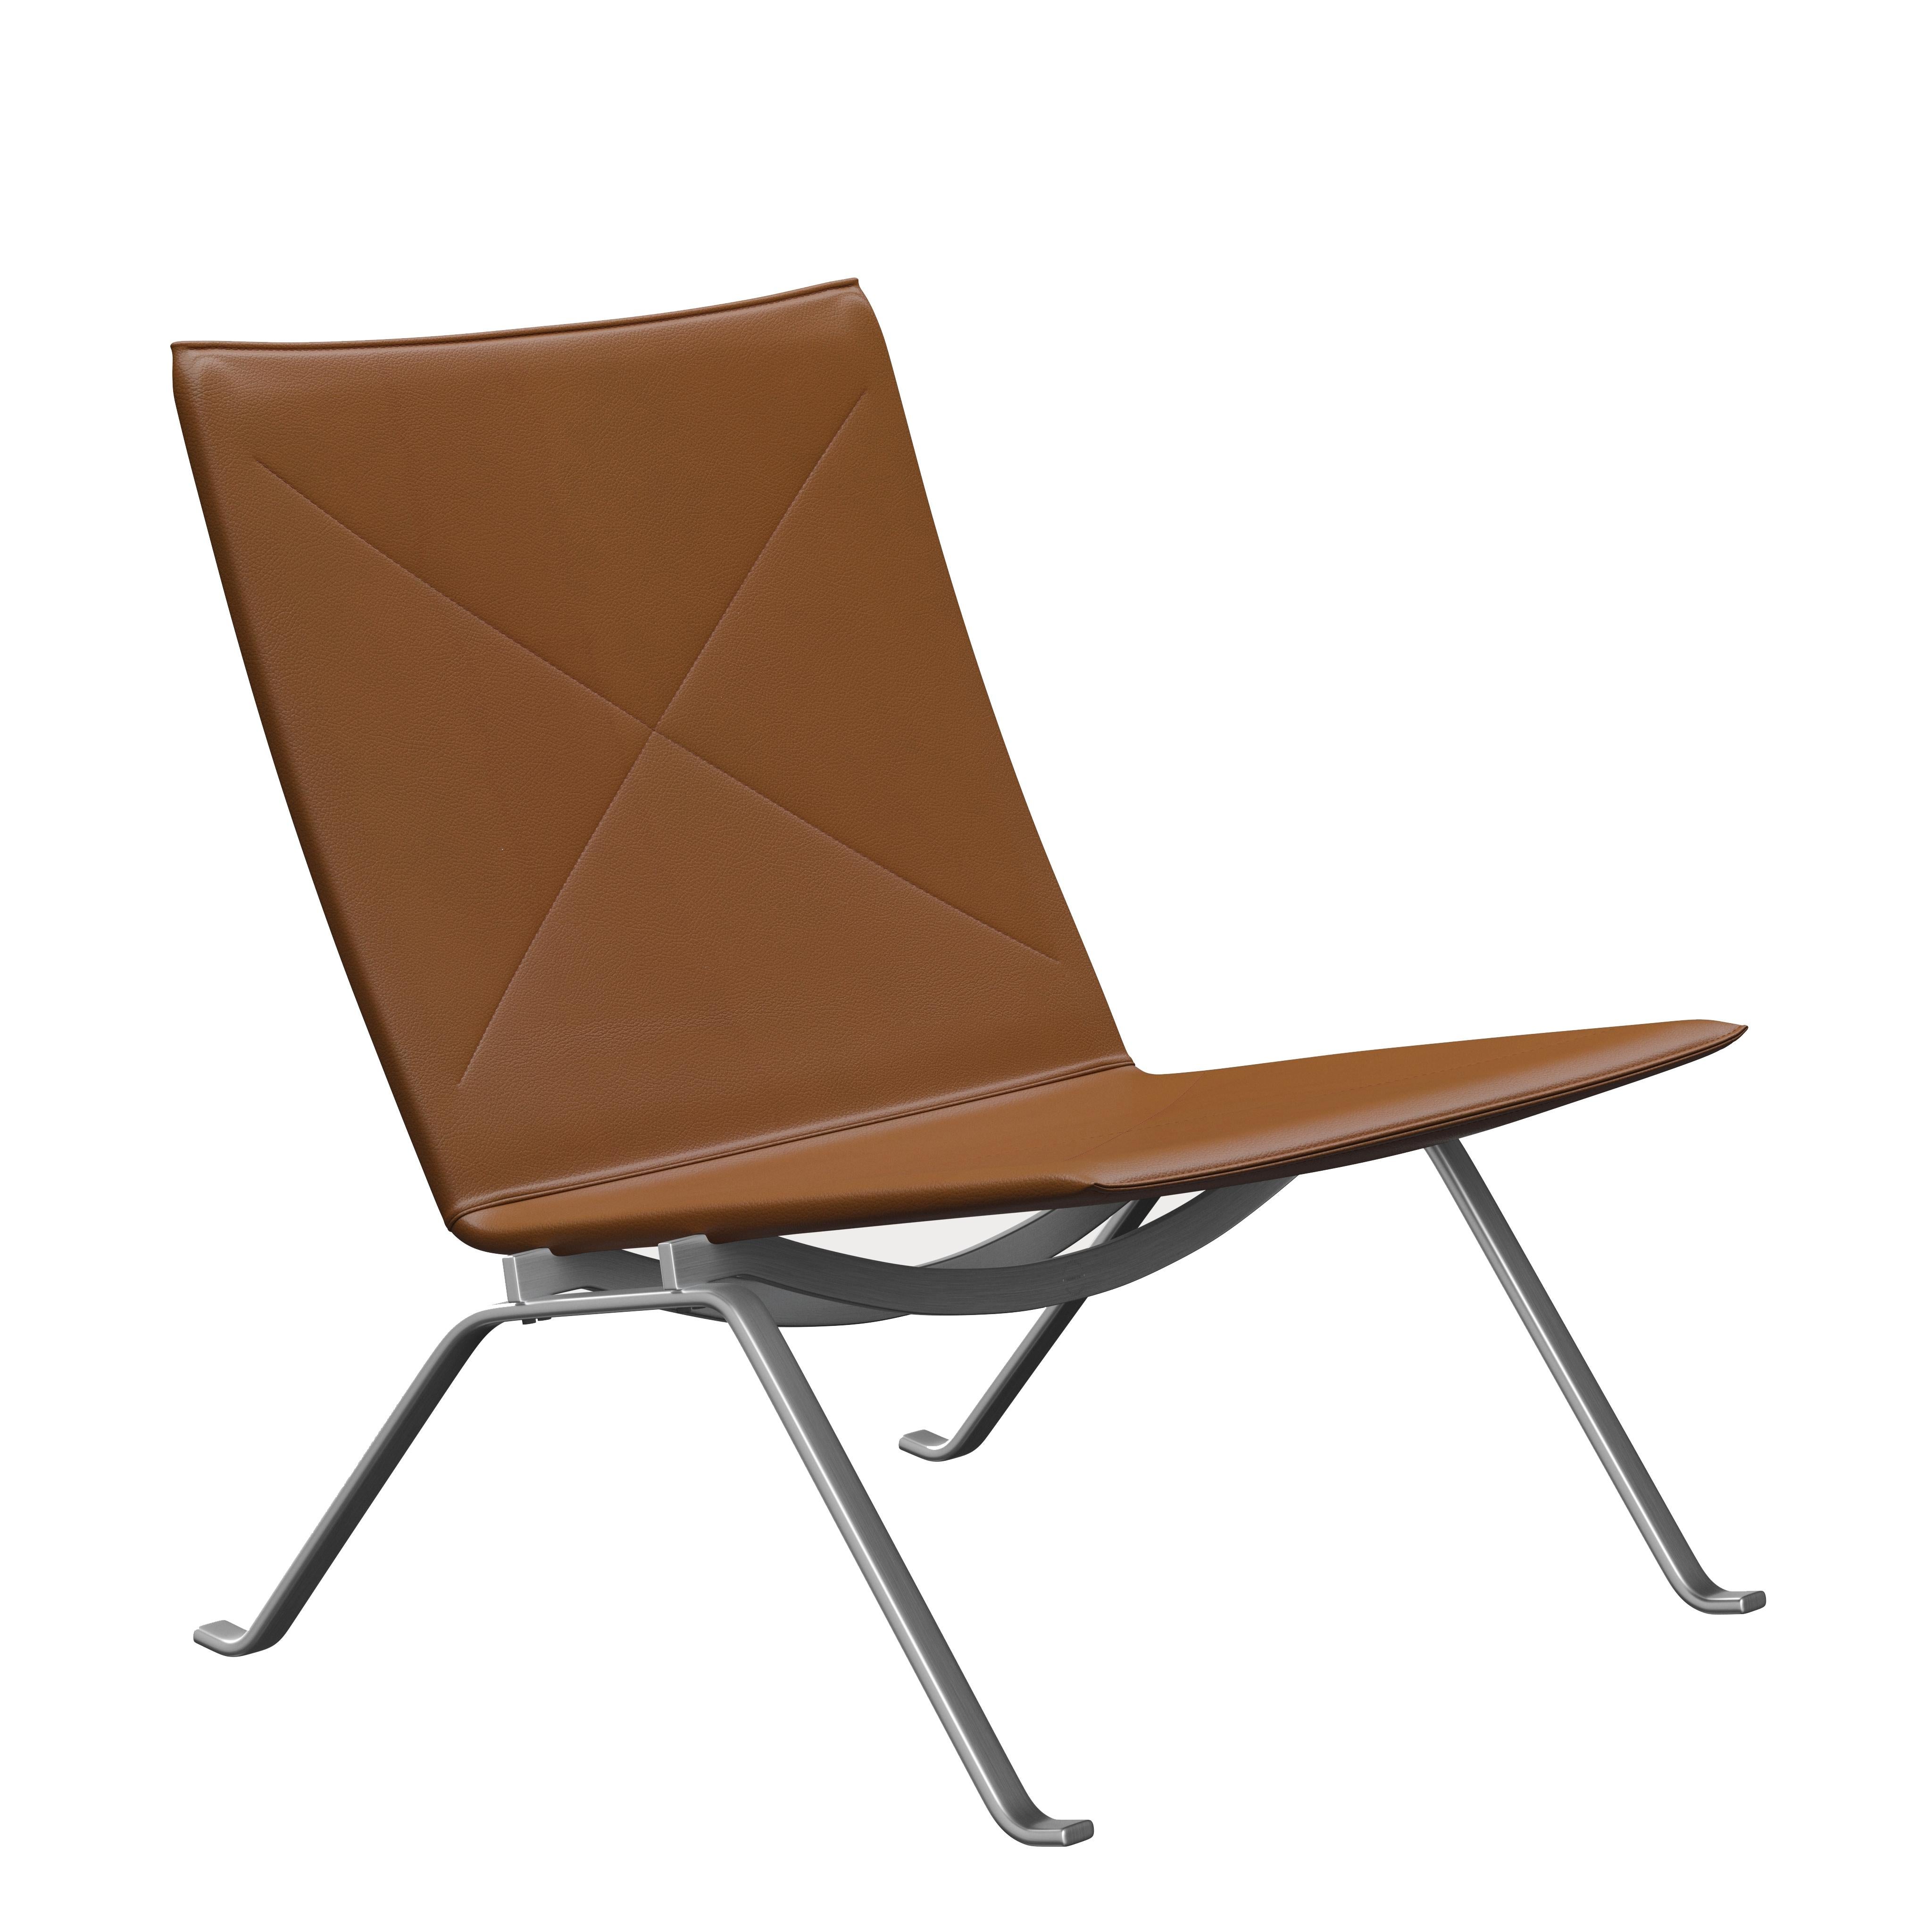 Poul Kjærholm 'PK22' Lounge Chair for Fritz Hansen in Aura Leather In New Condition For Sale In Glendale, CA